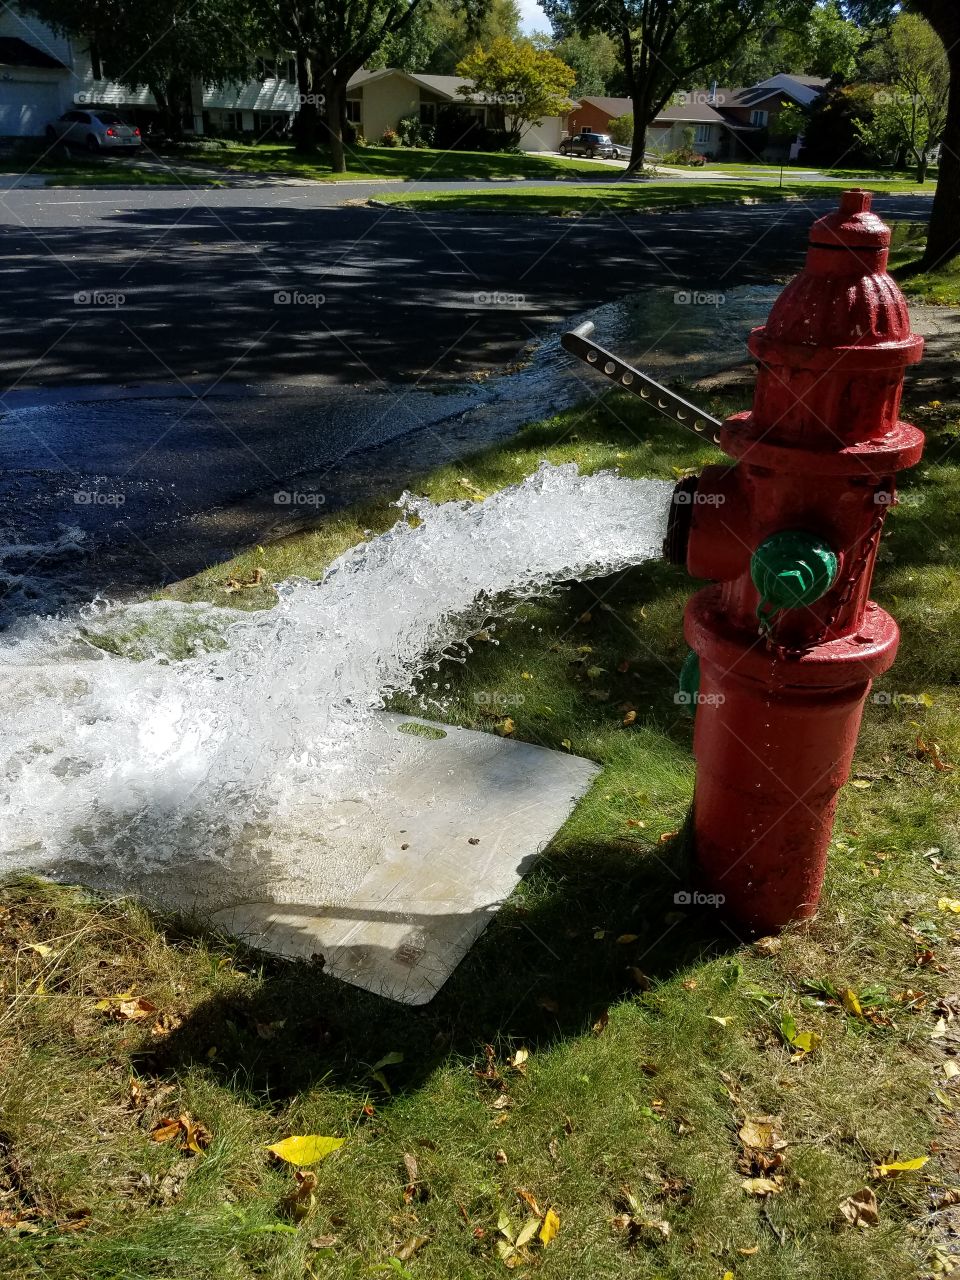 Fire Hydrant Test 2